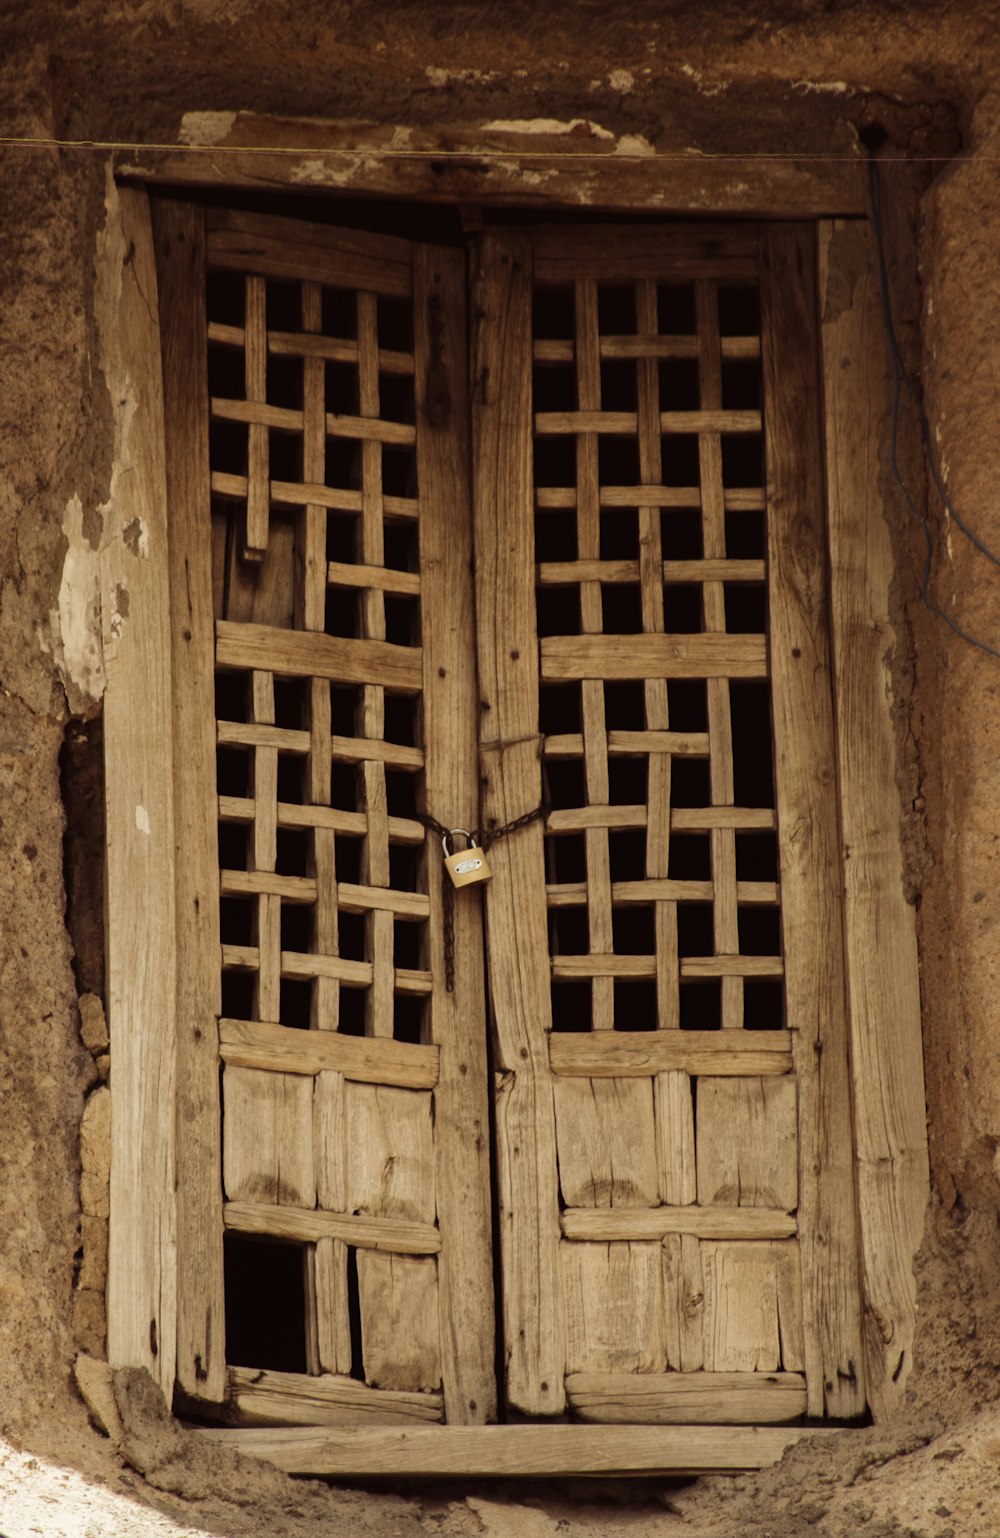 a pair of wooden doors sitting inside of a stone building